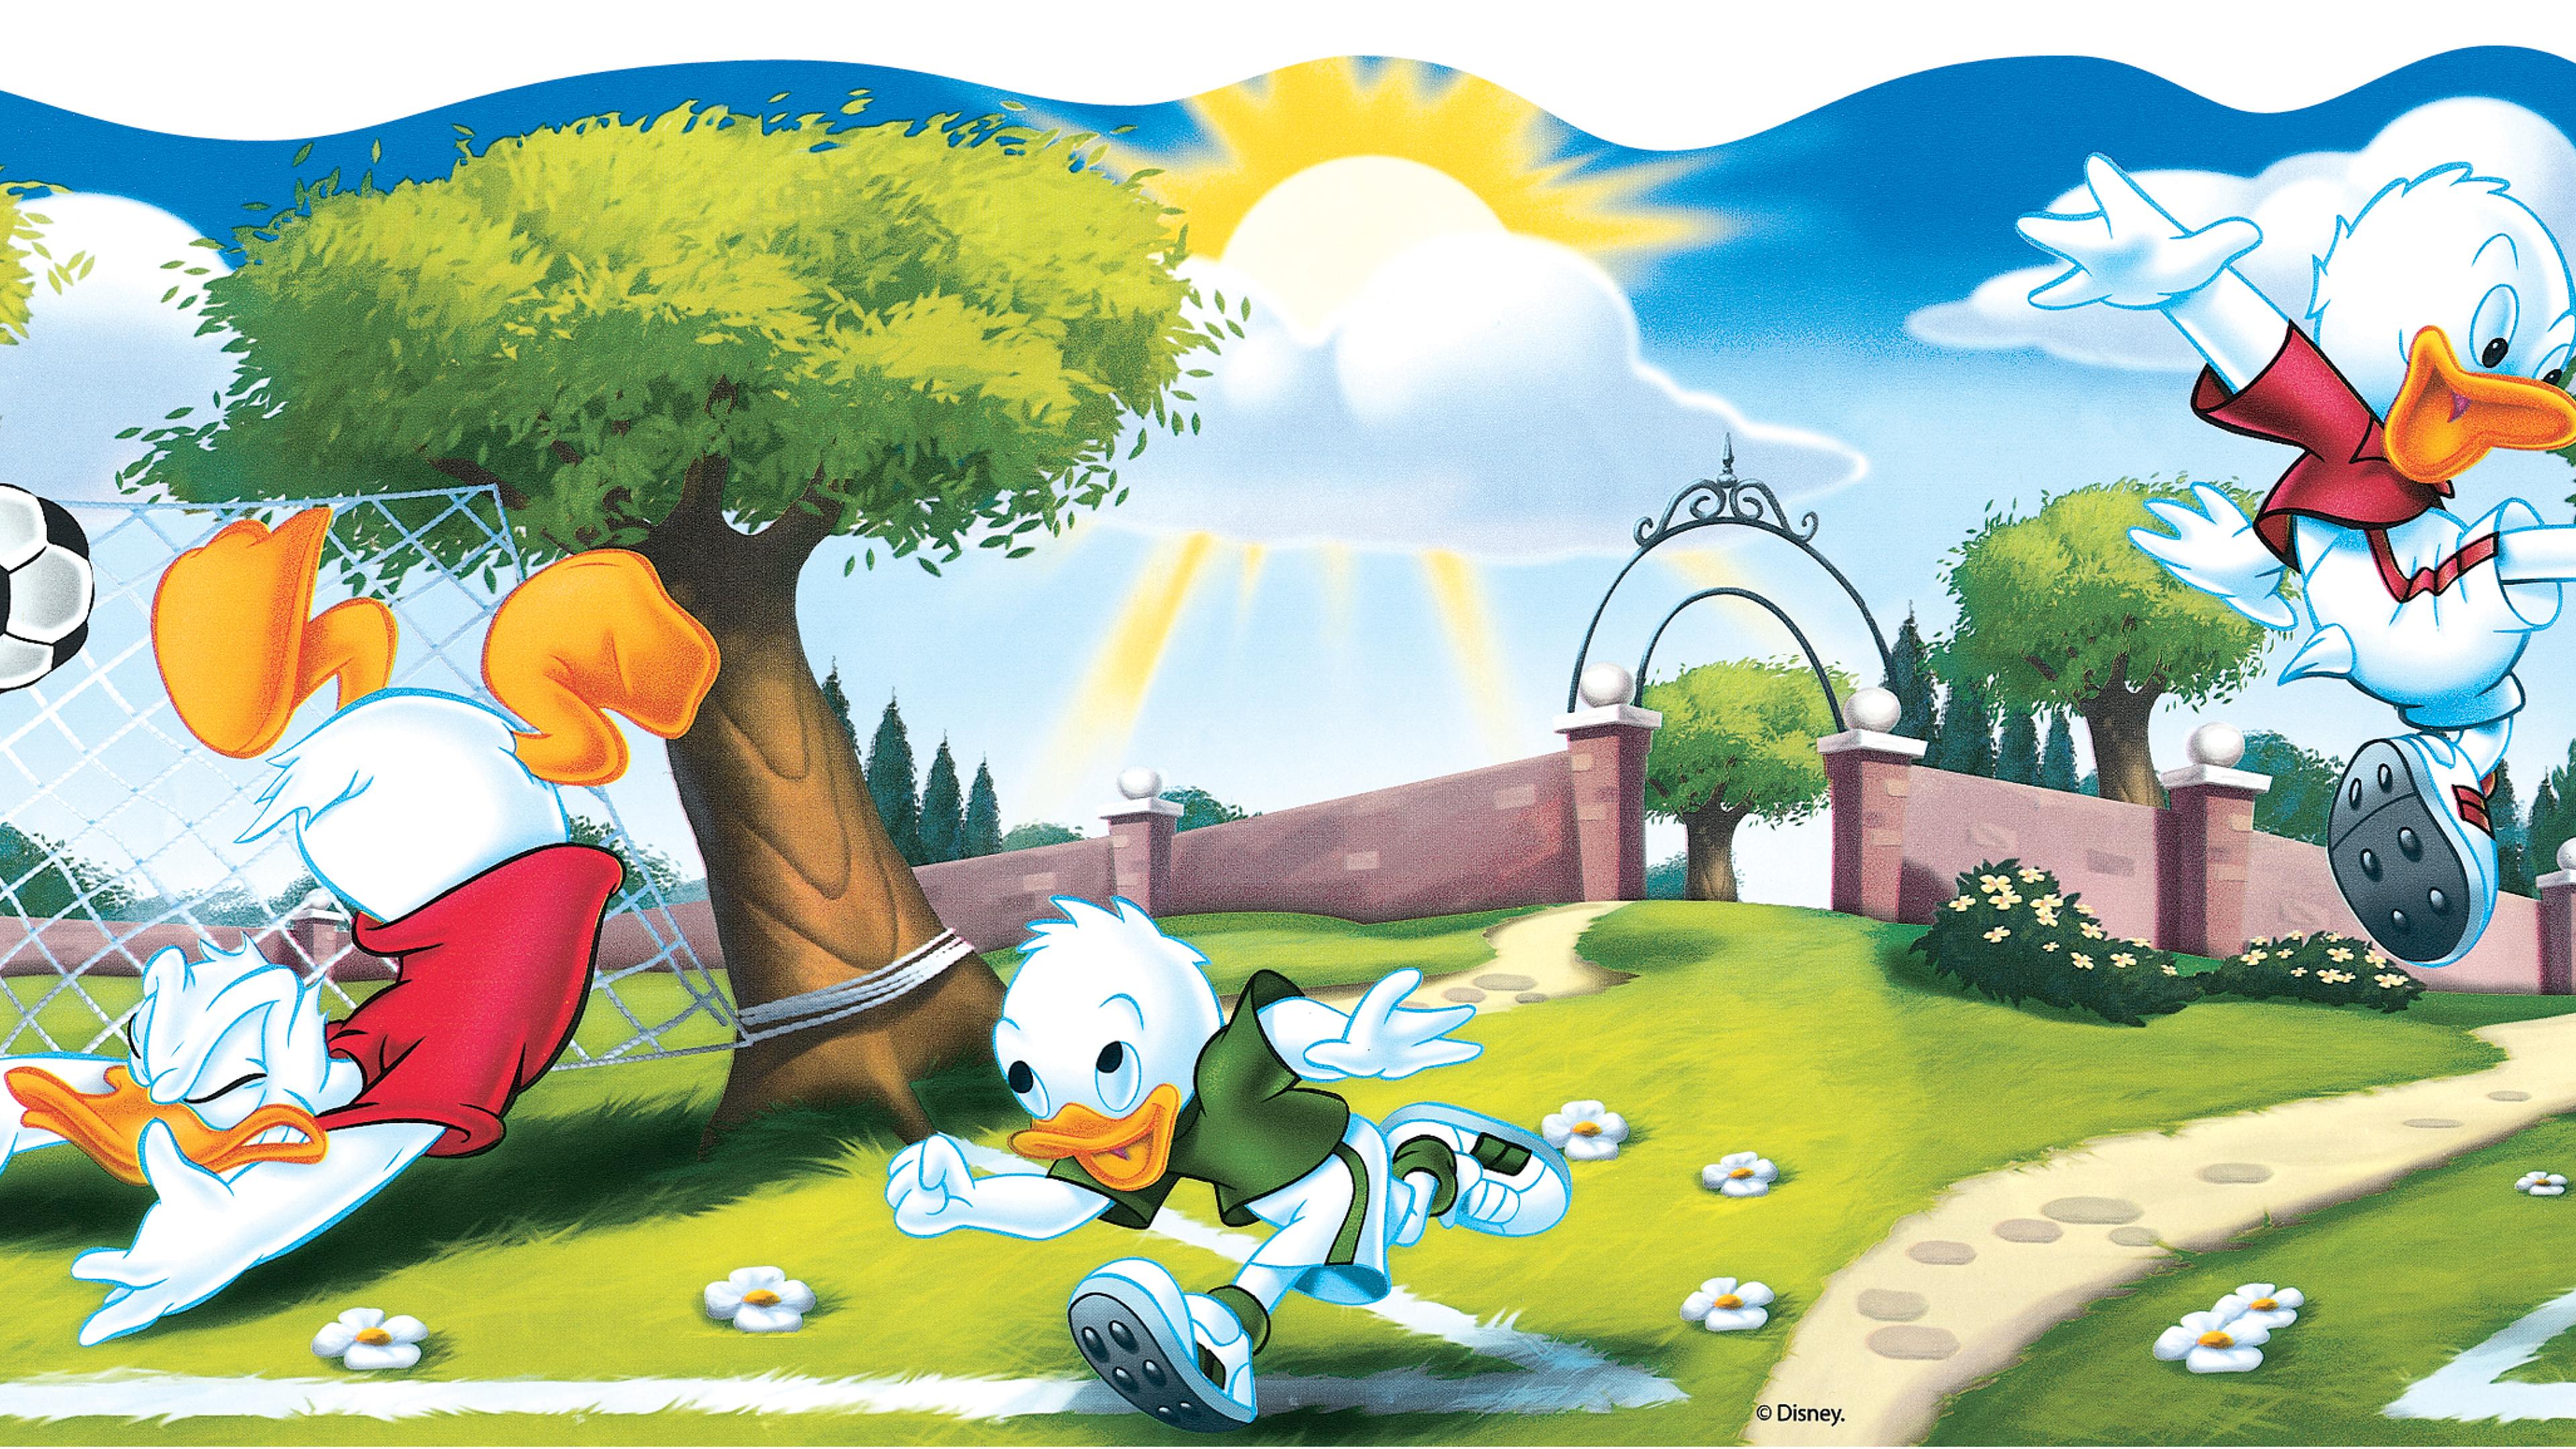 Tick, Trick, Track and Donald Duck play football